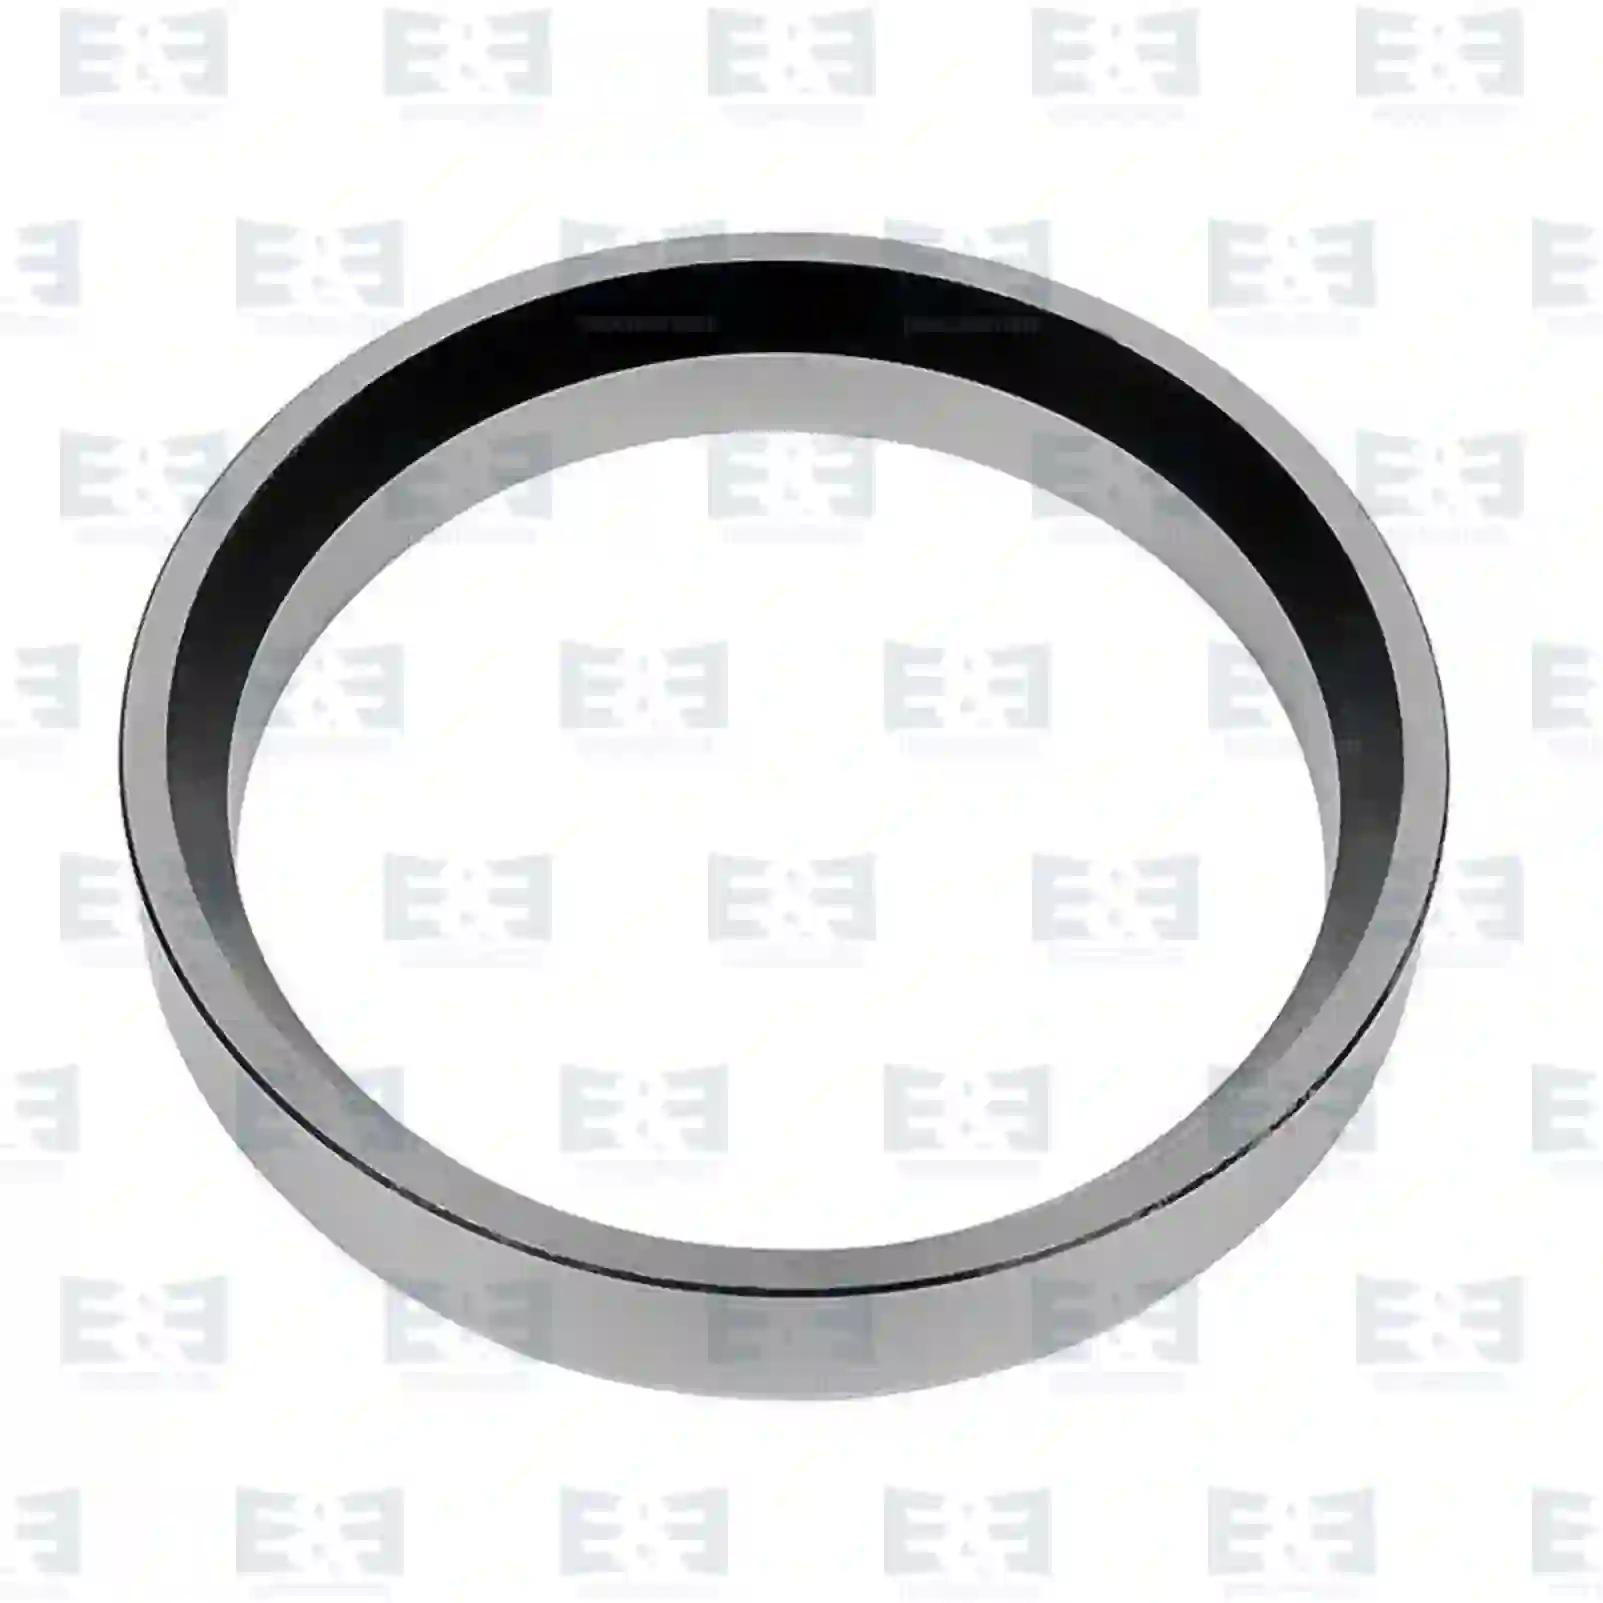  Thrust ring || E&E Truck Spare Parts | Truck Spare Parts, Auotomotive Spare Parts